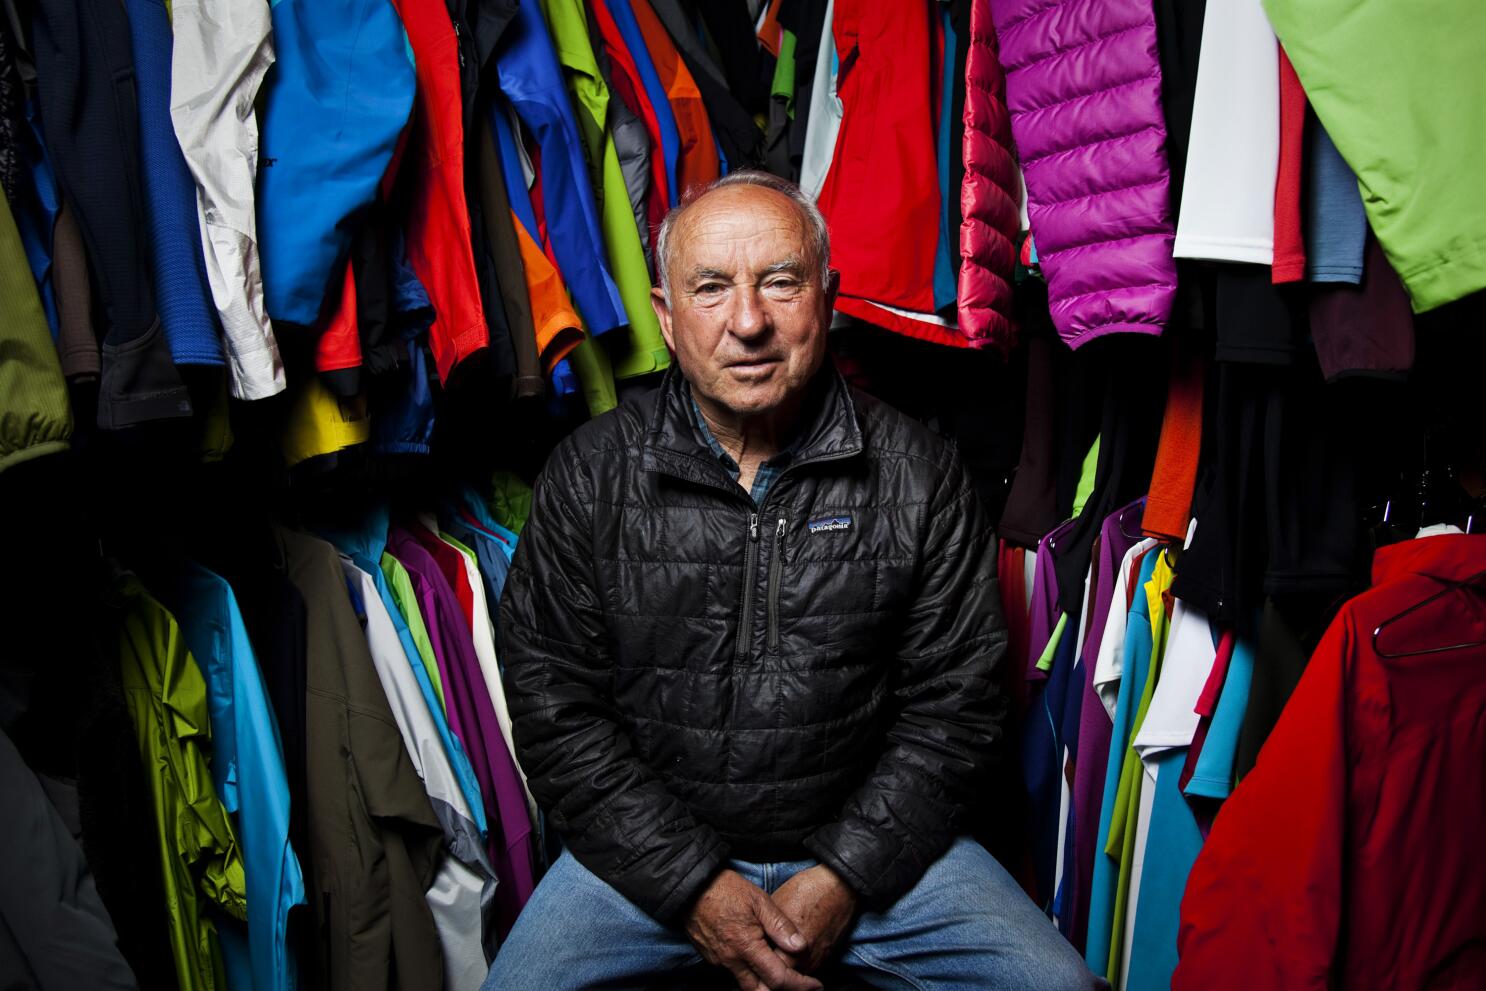 Why Patagonia's Yvon Chouinard Gave Up $3 Billion to Fight Climate